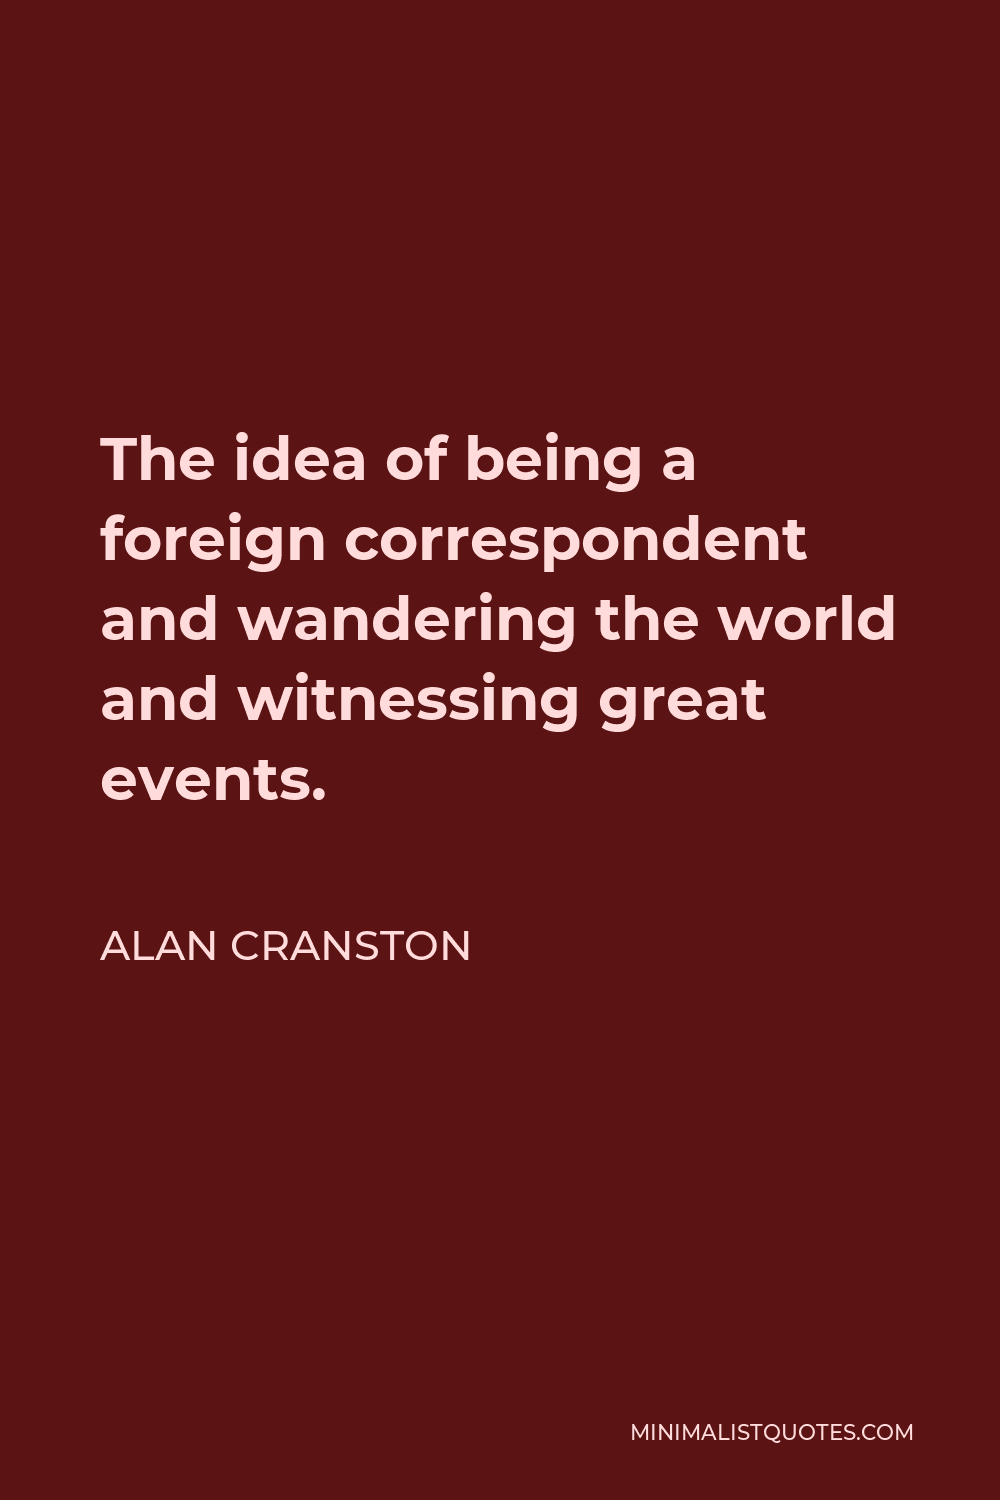 Alan Cranston Quote - The idea of being a foreign correspondent and wandering the world and witnessing great events.